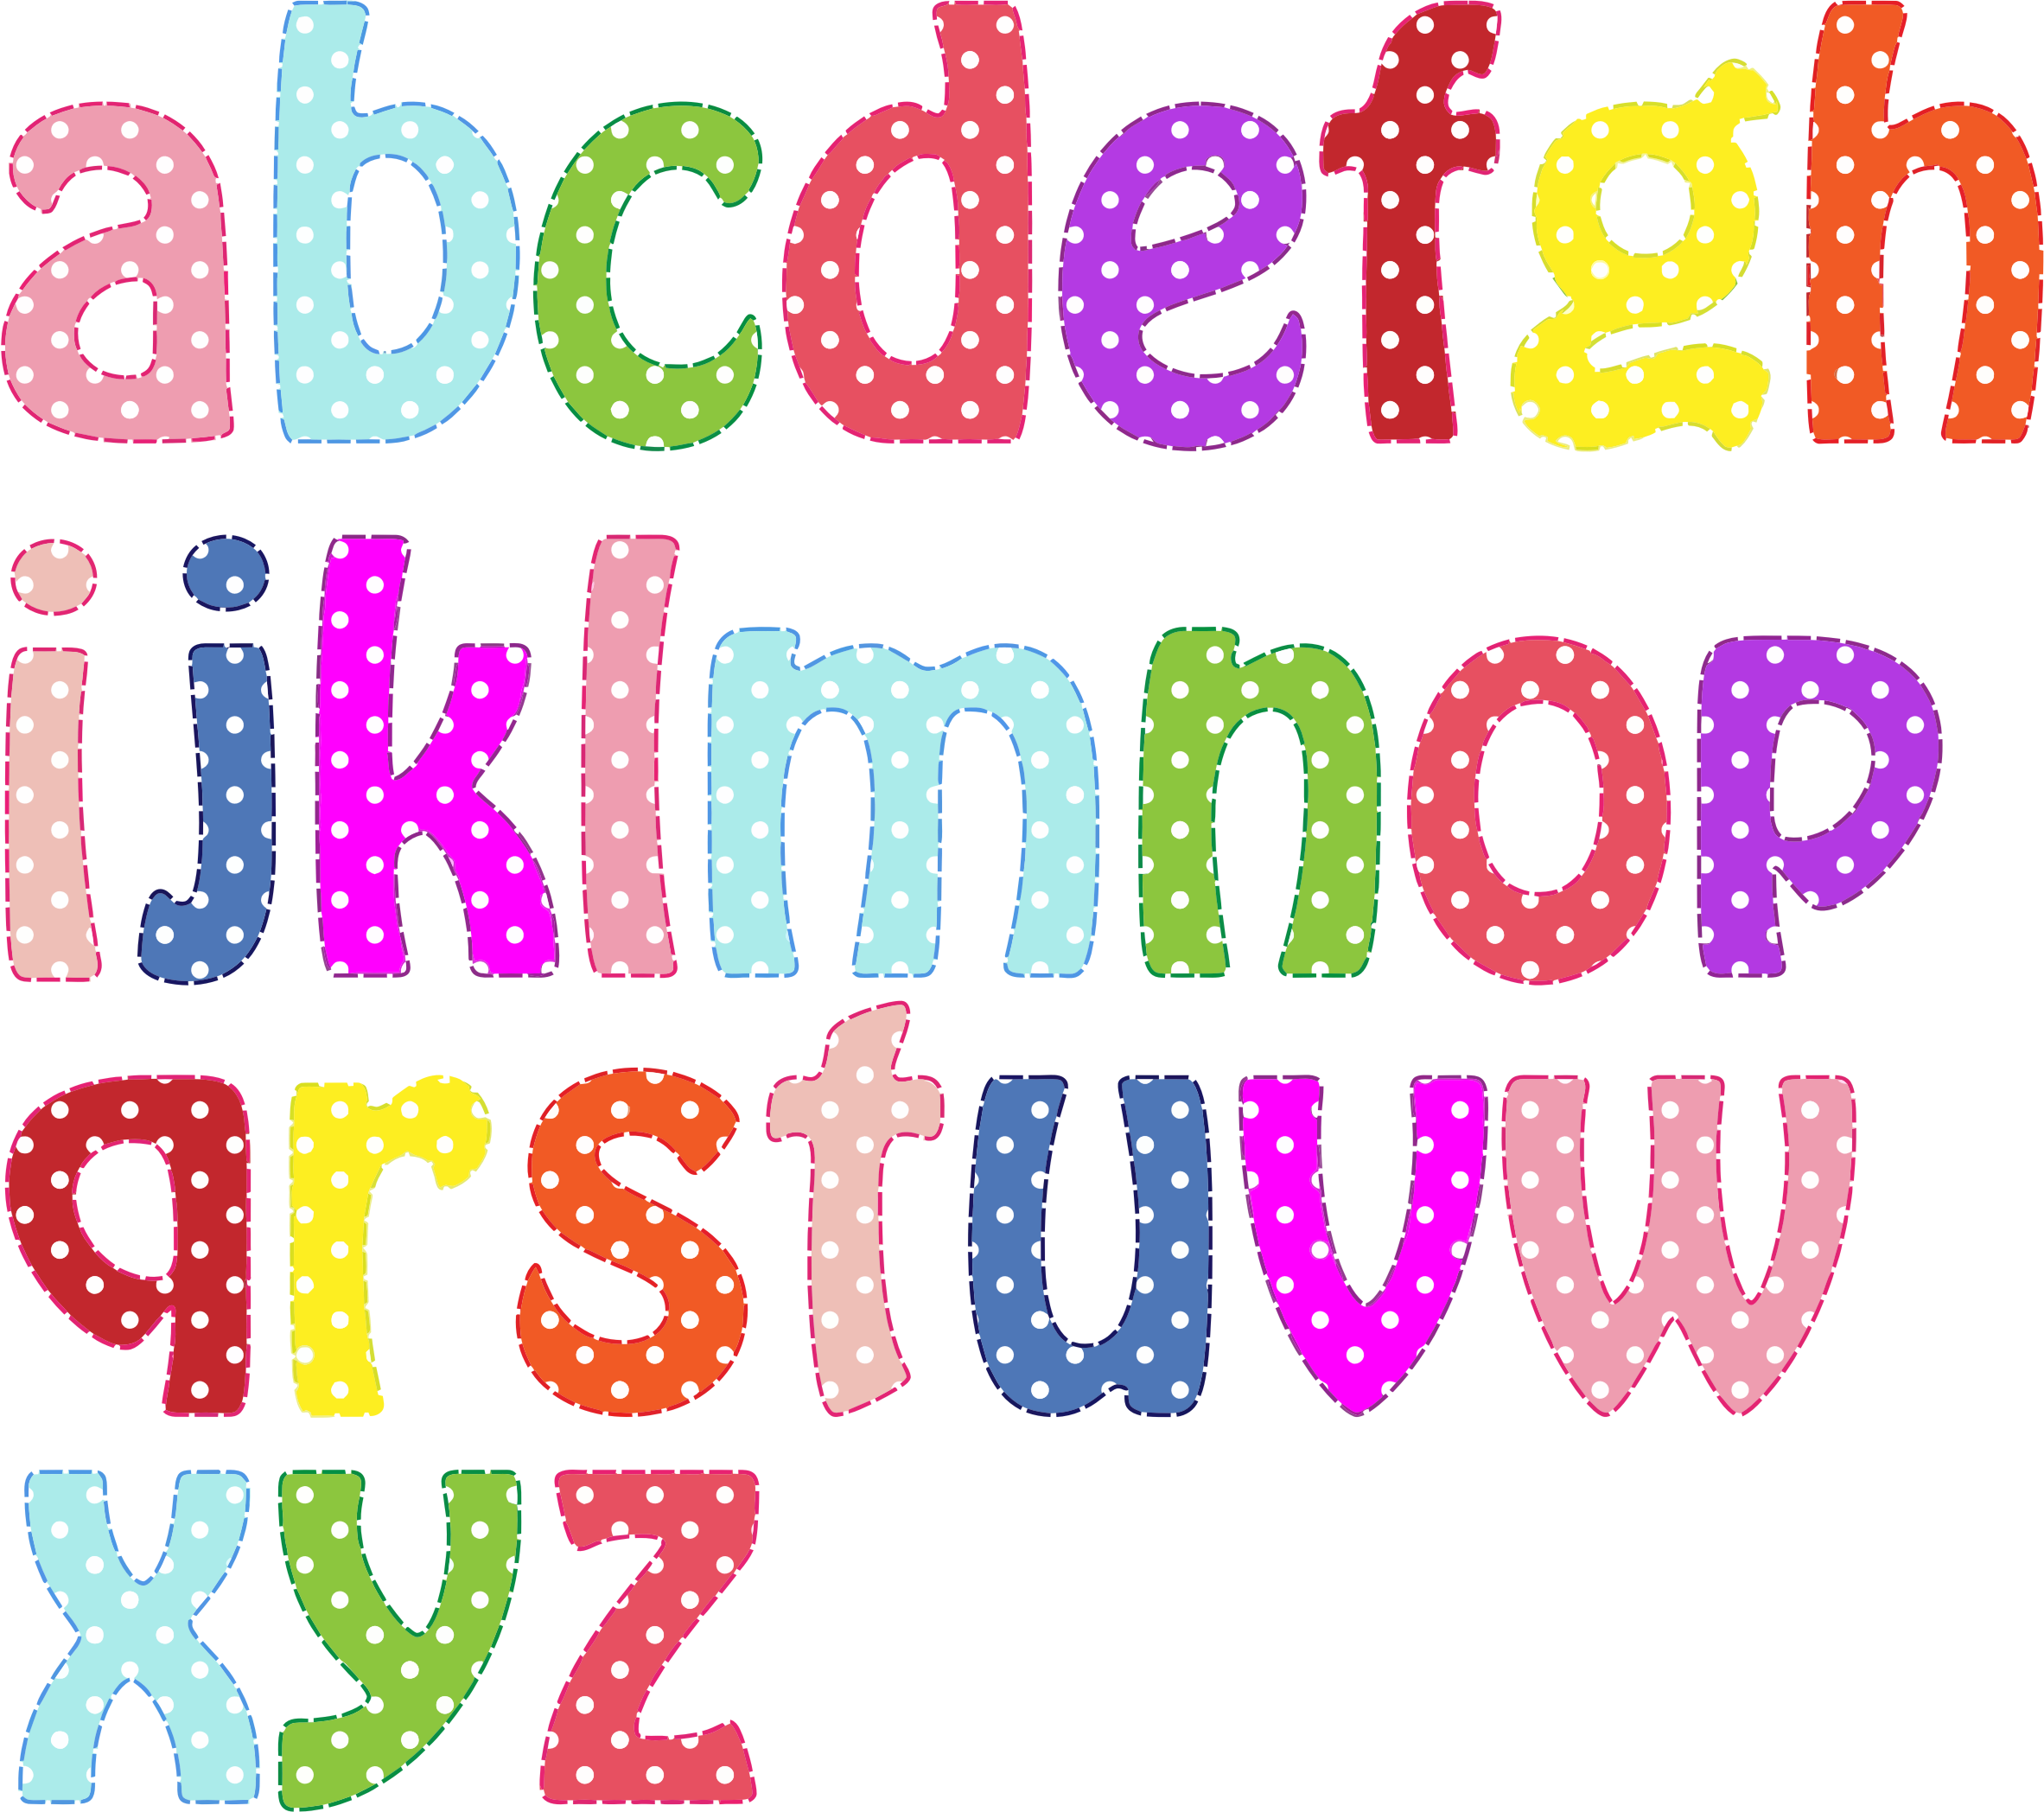 Alphabets Letter DriverLayer Search Engine